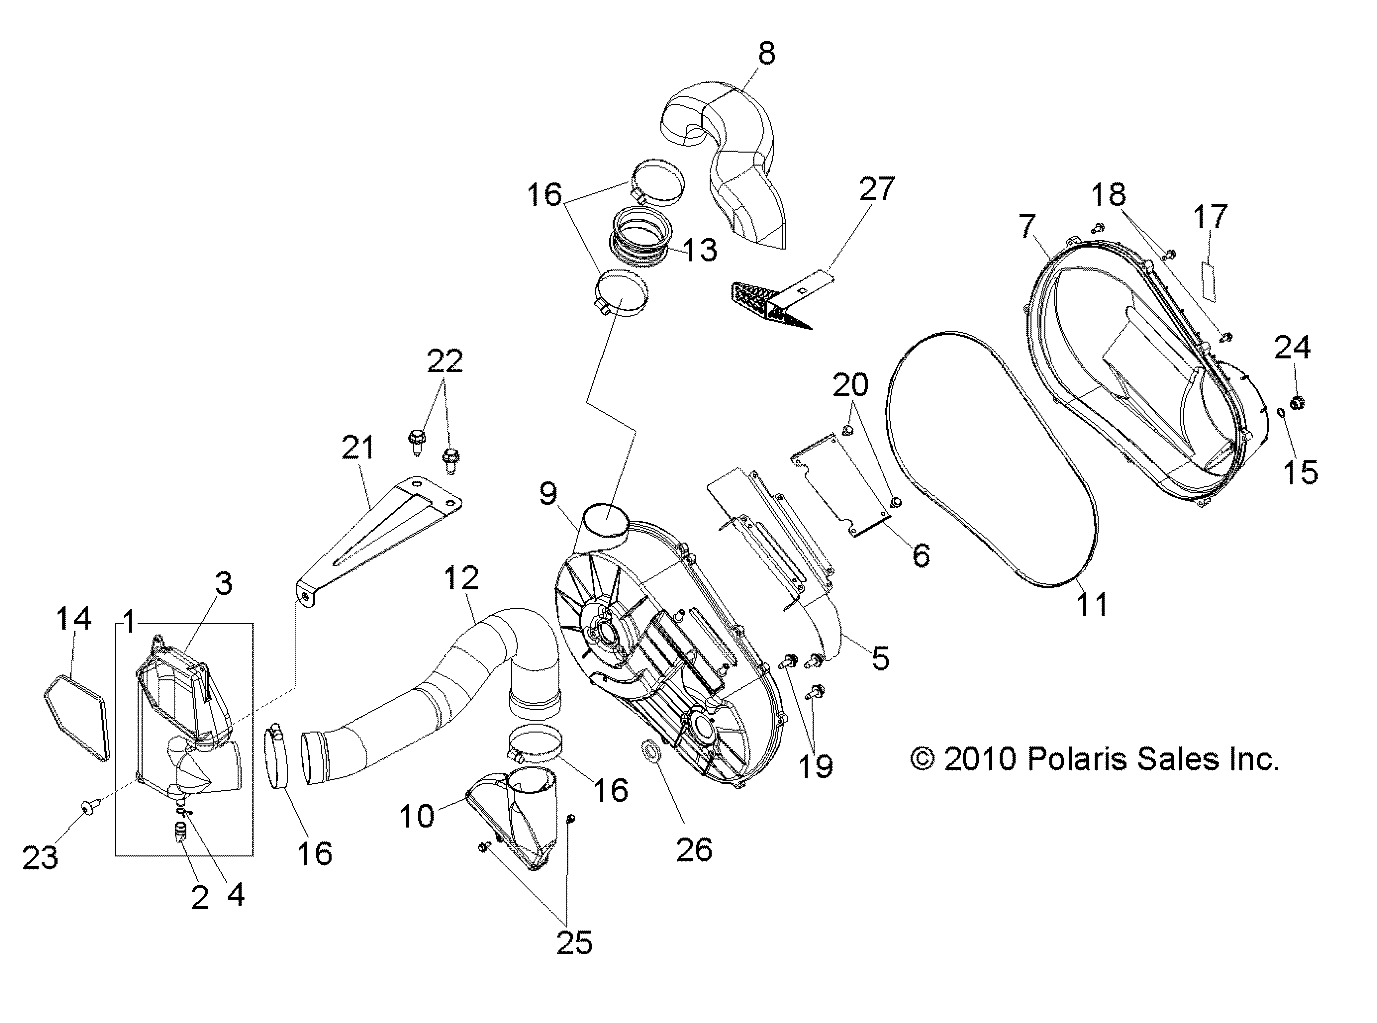 Part Number : 5438326 CLUTCH DUCT  AIR OUTLET